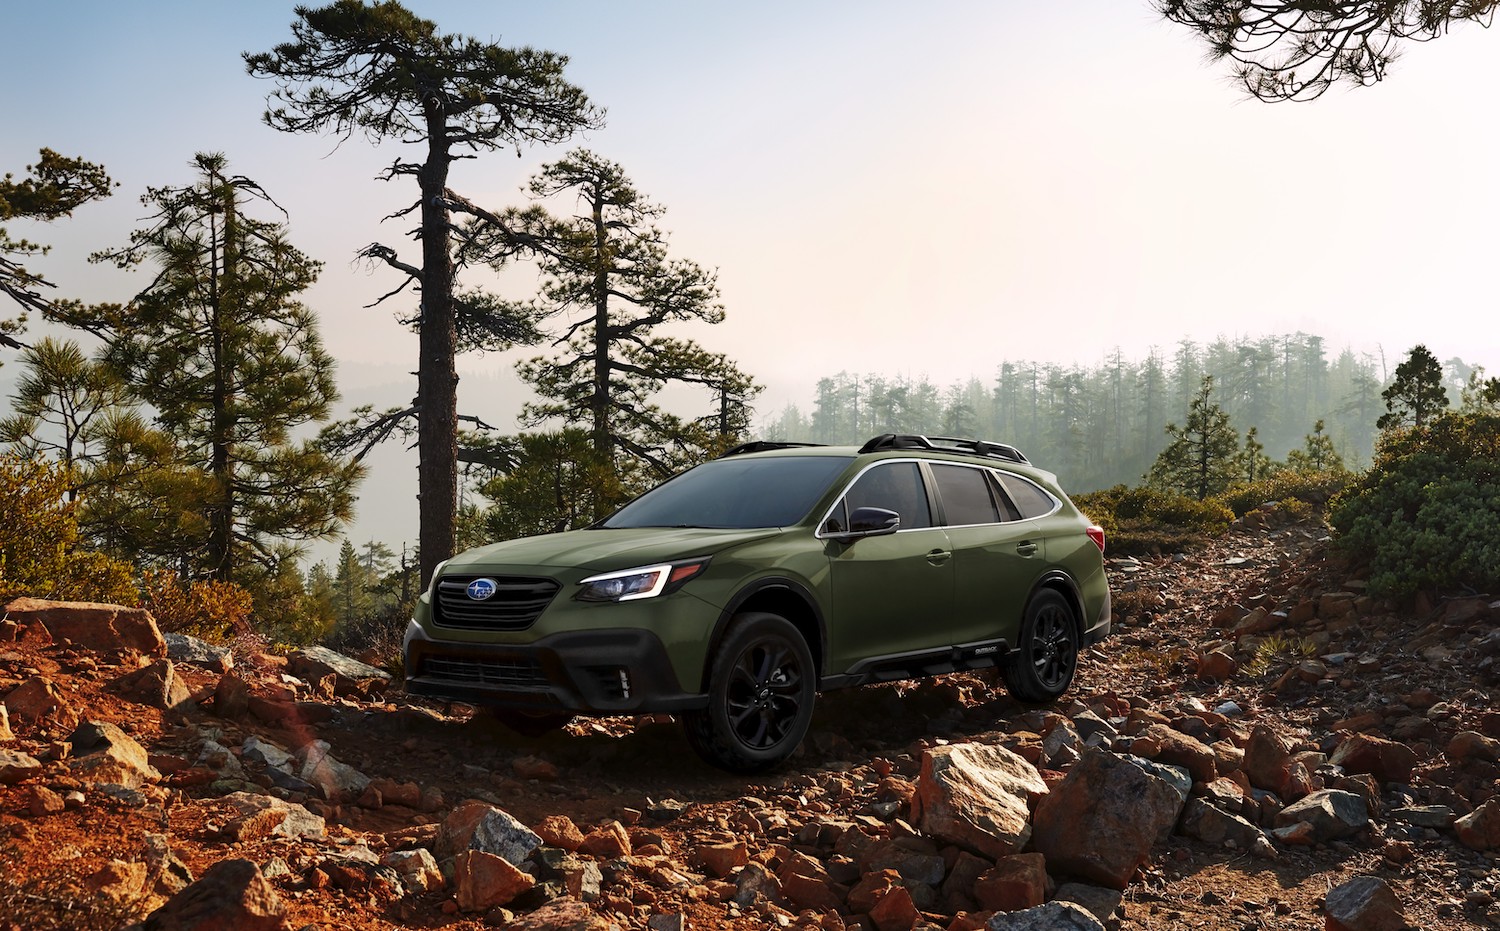 2021 Subaru Outback in the wilderness